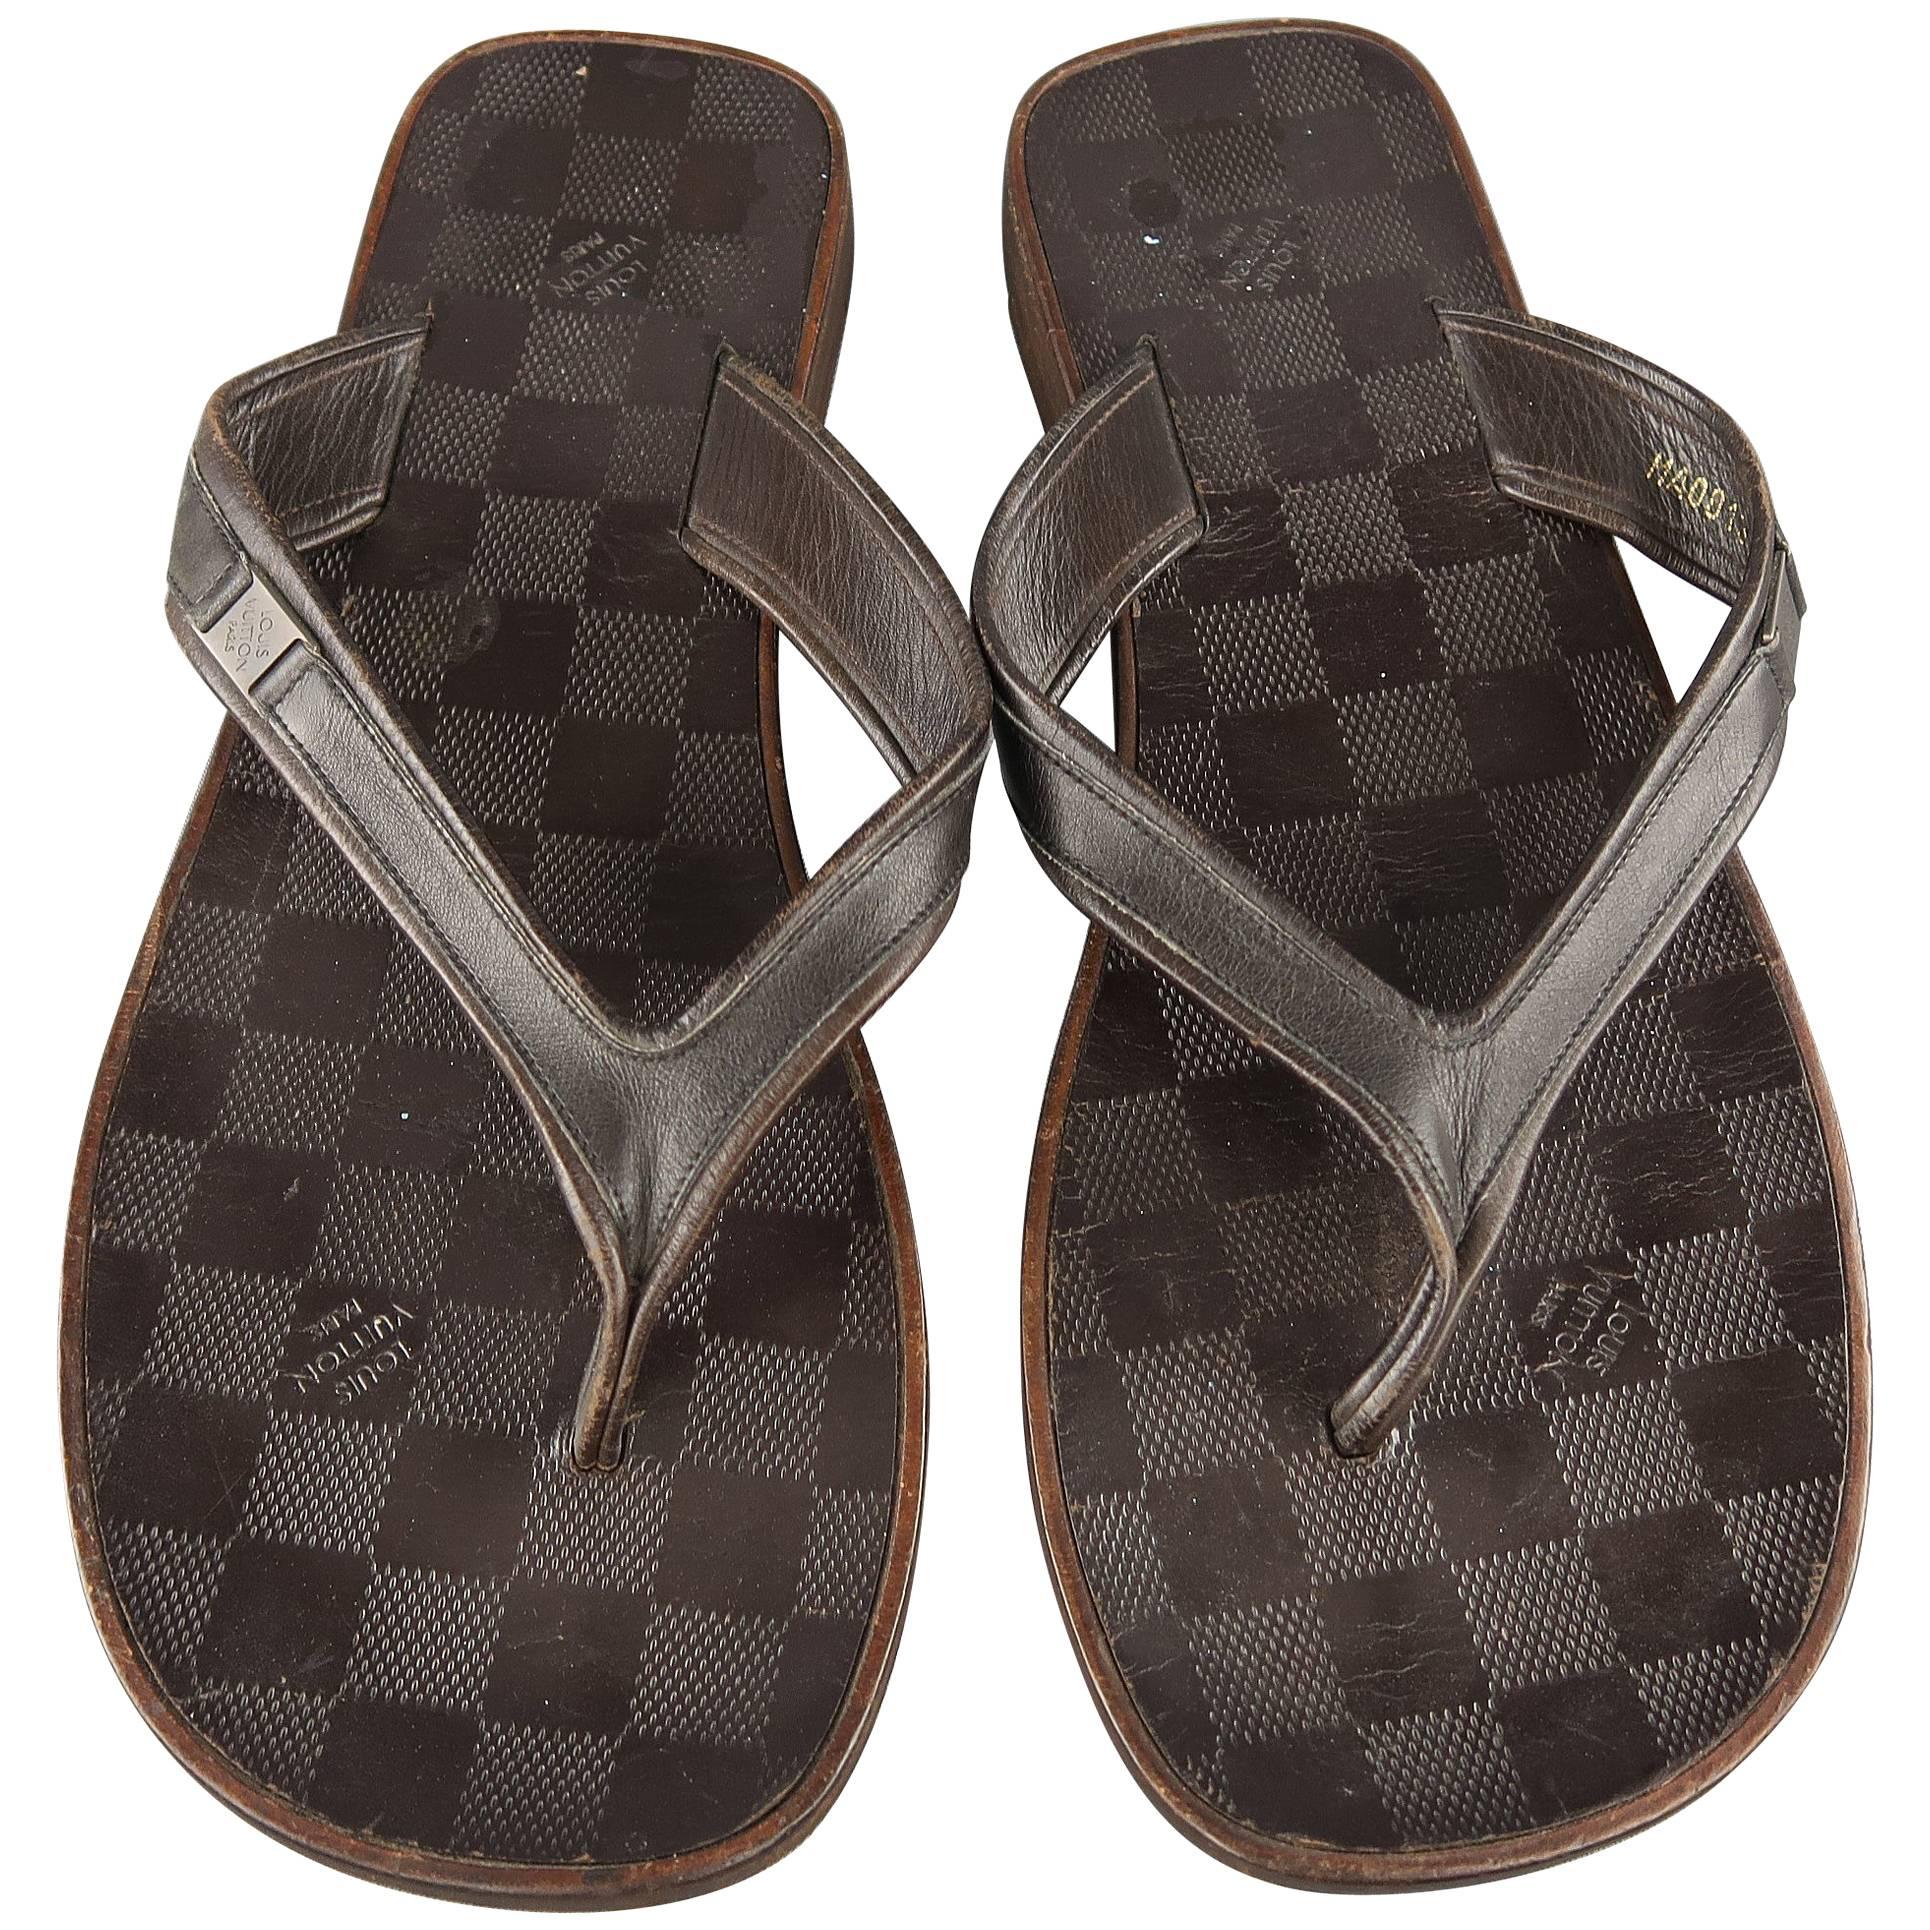 Mens Louis Vuitton Sandals - 2 For Sale on 1stDibs  men's louis vuitton  sandals, louis vuitton flip flops mens price, louis vuitton men's sandals